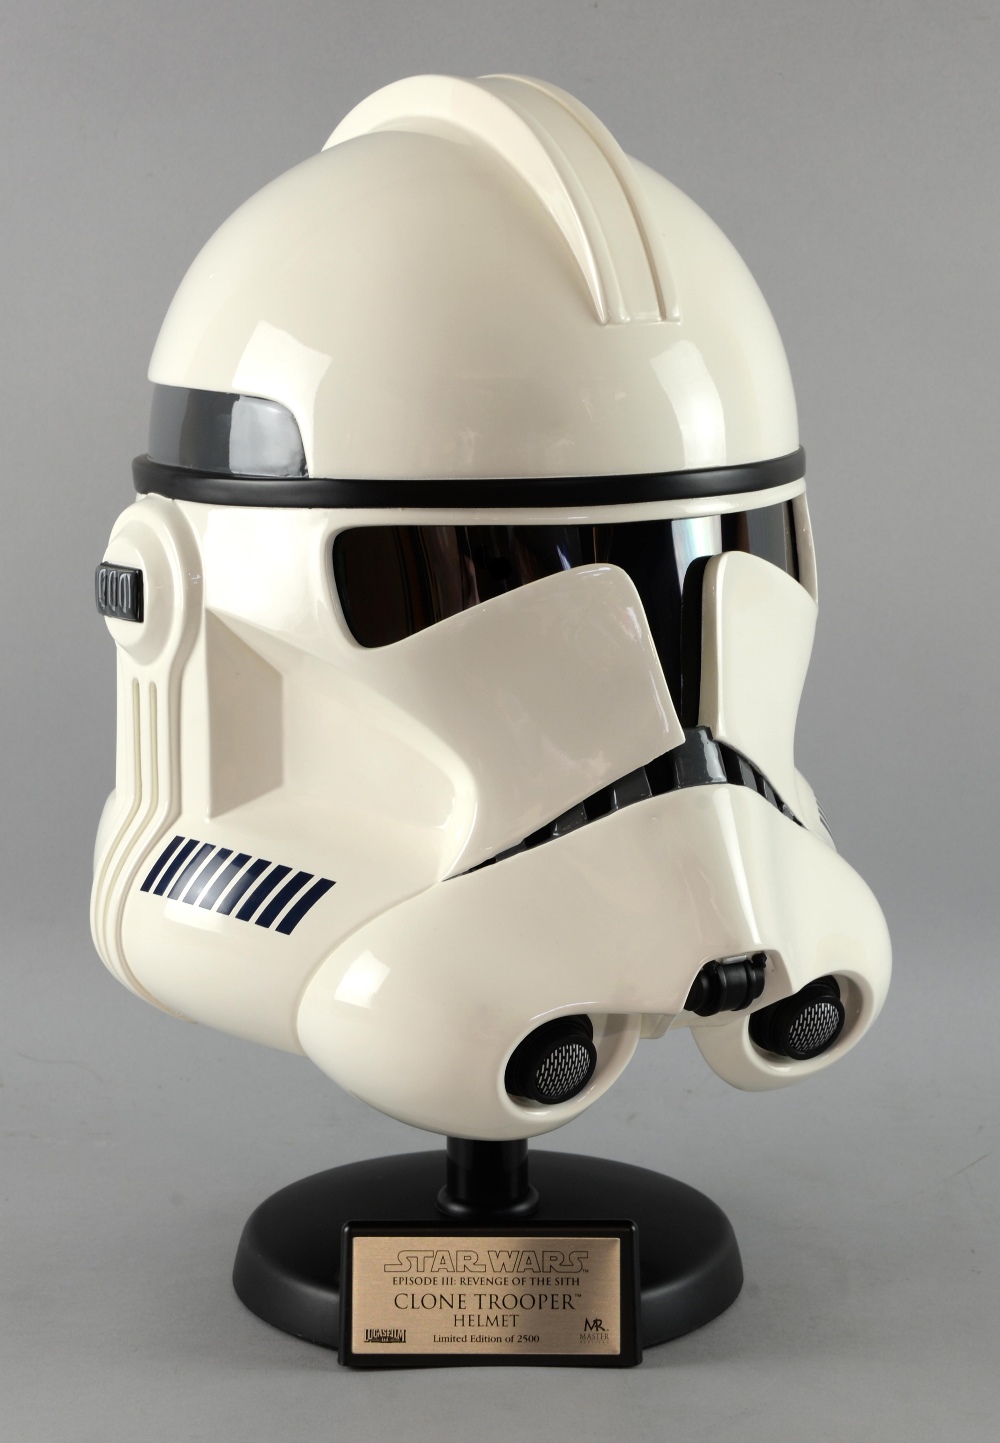 Star Wars - Master Replicas Episode III; Revenge of the Sith Clone Trooper Helmet, Limited Edition